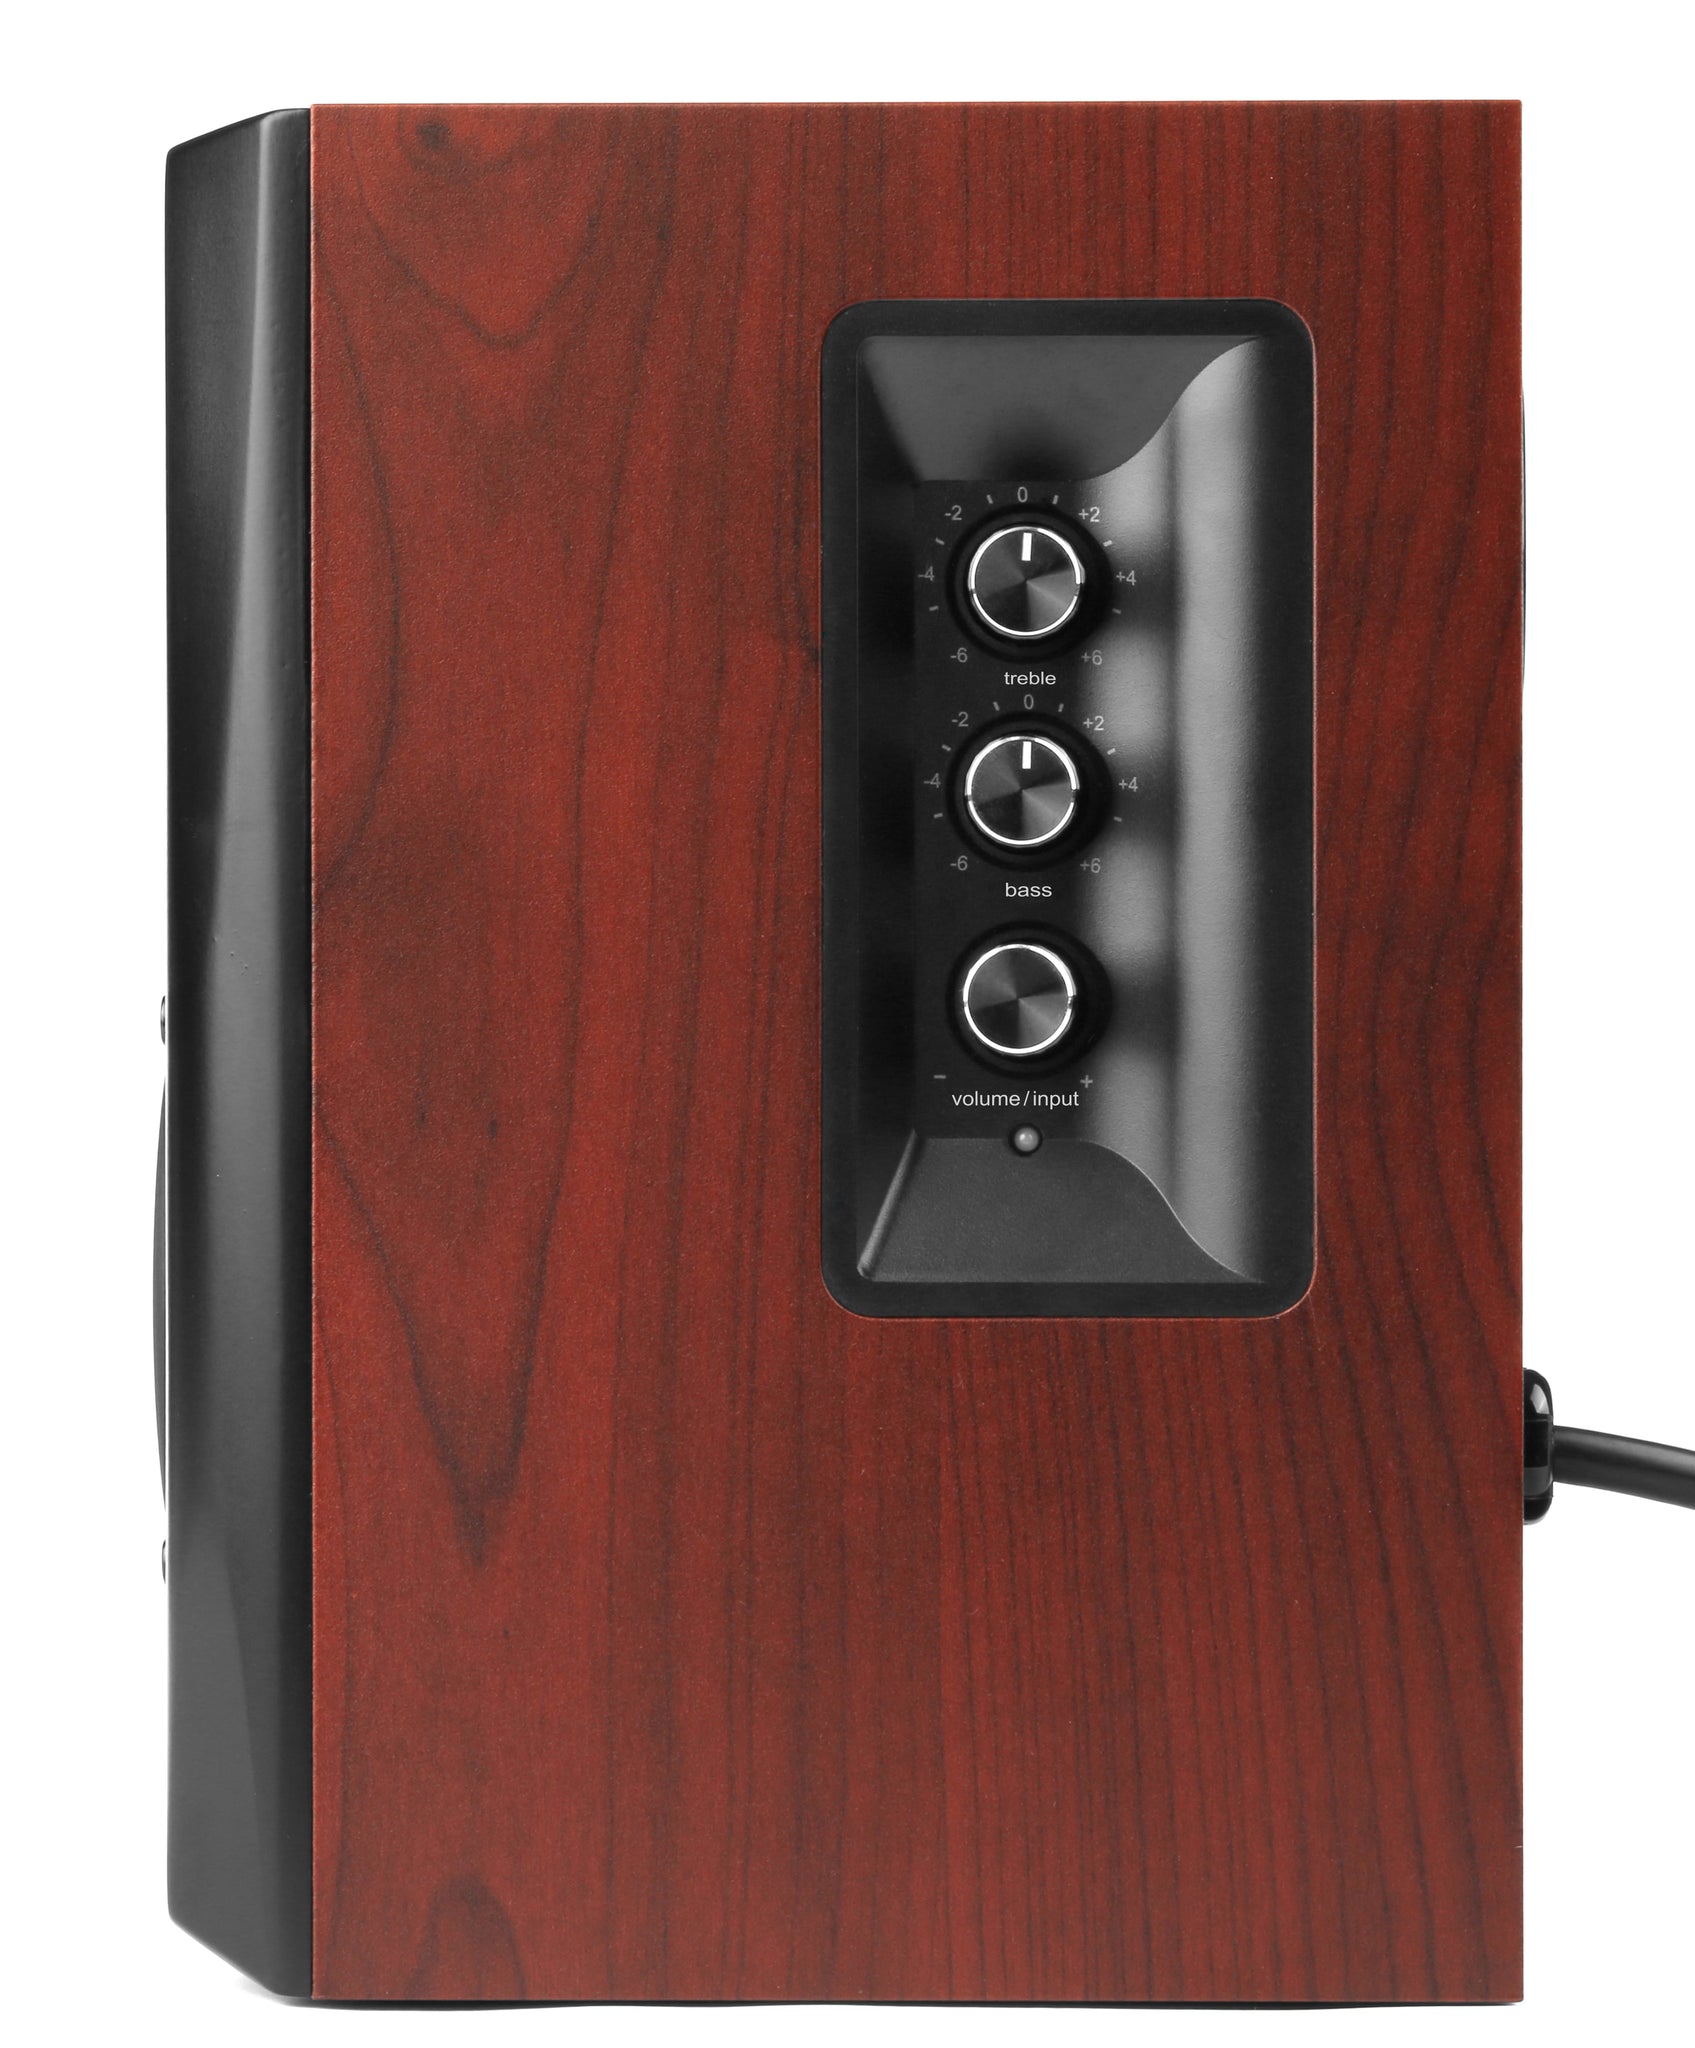 Edifier S350DB 2.1 Active Bluetooth Multimedia Speaker System - Brown